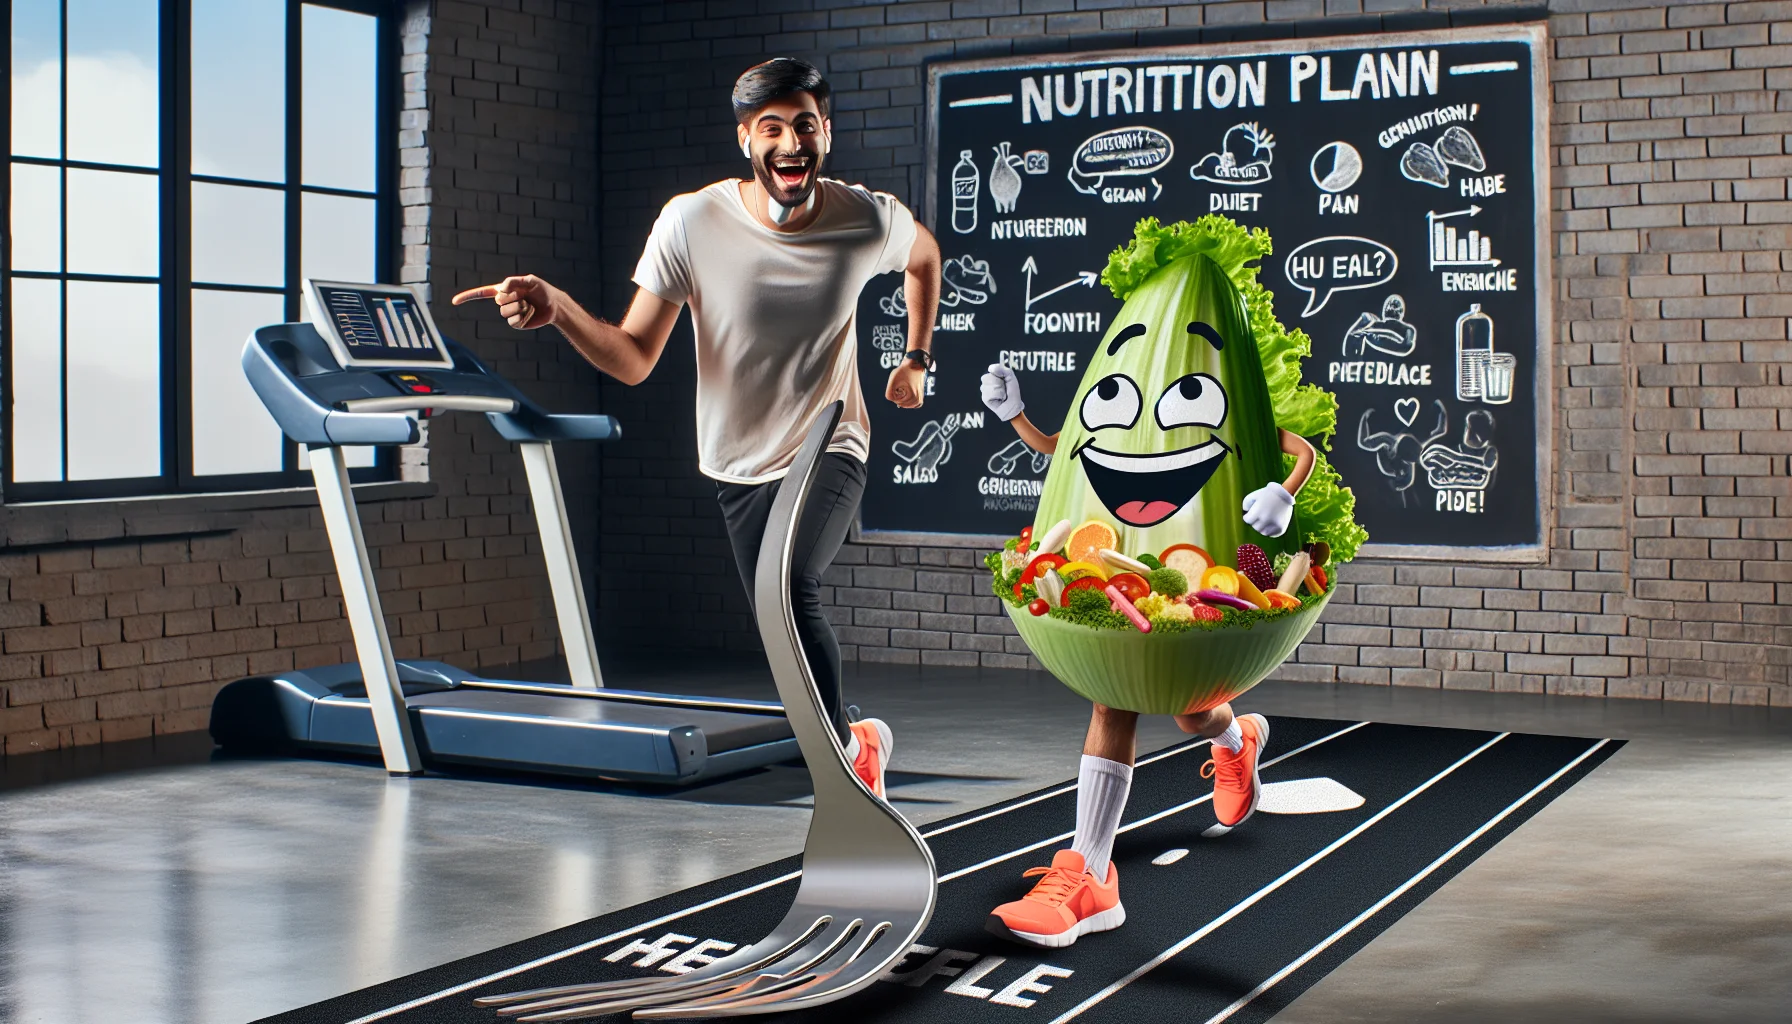 A humorous and enticing scene of a health and fitness journey with a generic nutrition program. A person of Caucasian descent, wearing neon running shoes, is jogging on the spot while holding a comically oversized fork with a large cartoon image of a salad at the end of it. The floor they're jogging on is a giant treadmill belt with the words 'Healthy Living' written along it. A South Asian descent coach is giggling while pointing at a blackboard covered in light-hearted hand-drawn illustrations and graphs showing the fun side of fitness, diet plan, and exercise.